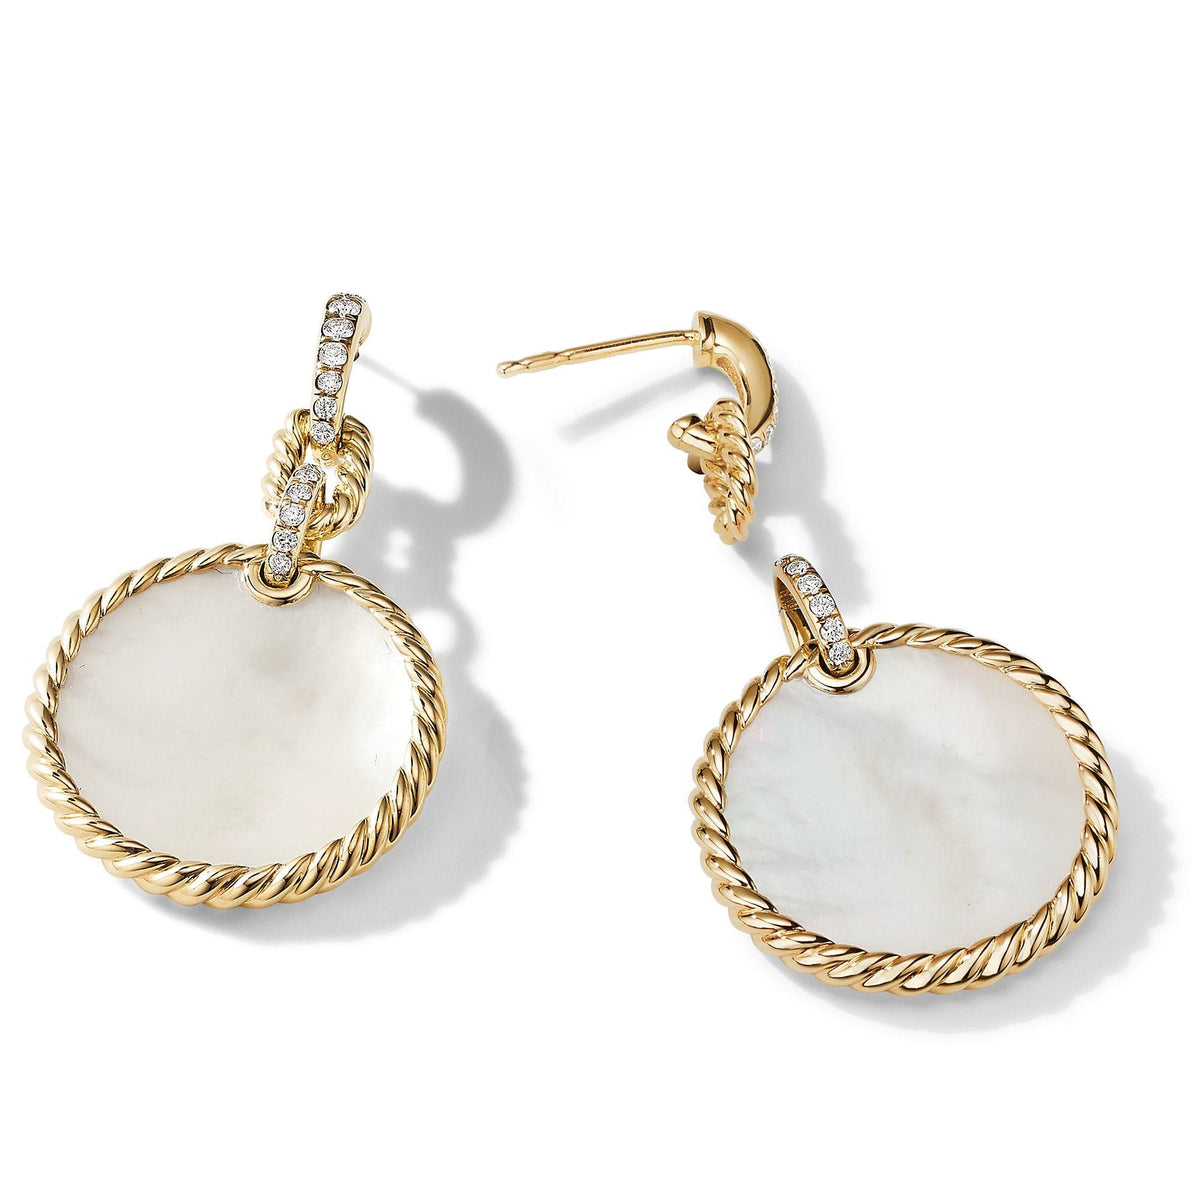 DY Elements Drop Earrings 18K Yellow Gold with Mother of Pearl and Pavé Diamonds